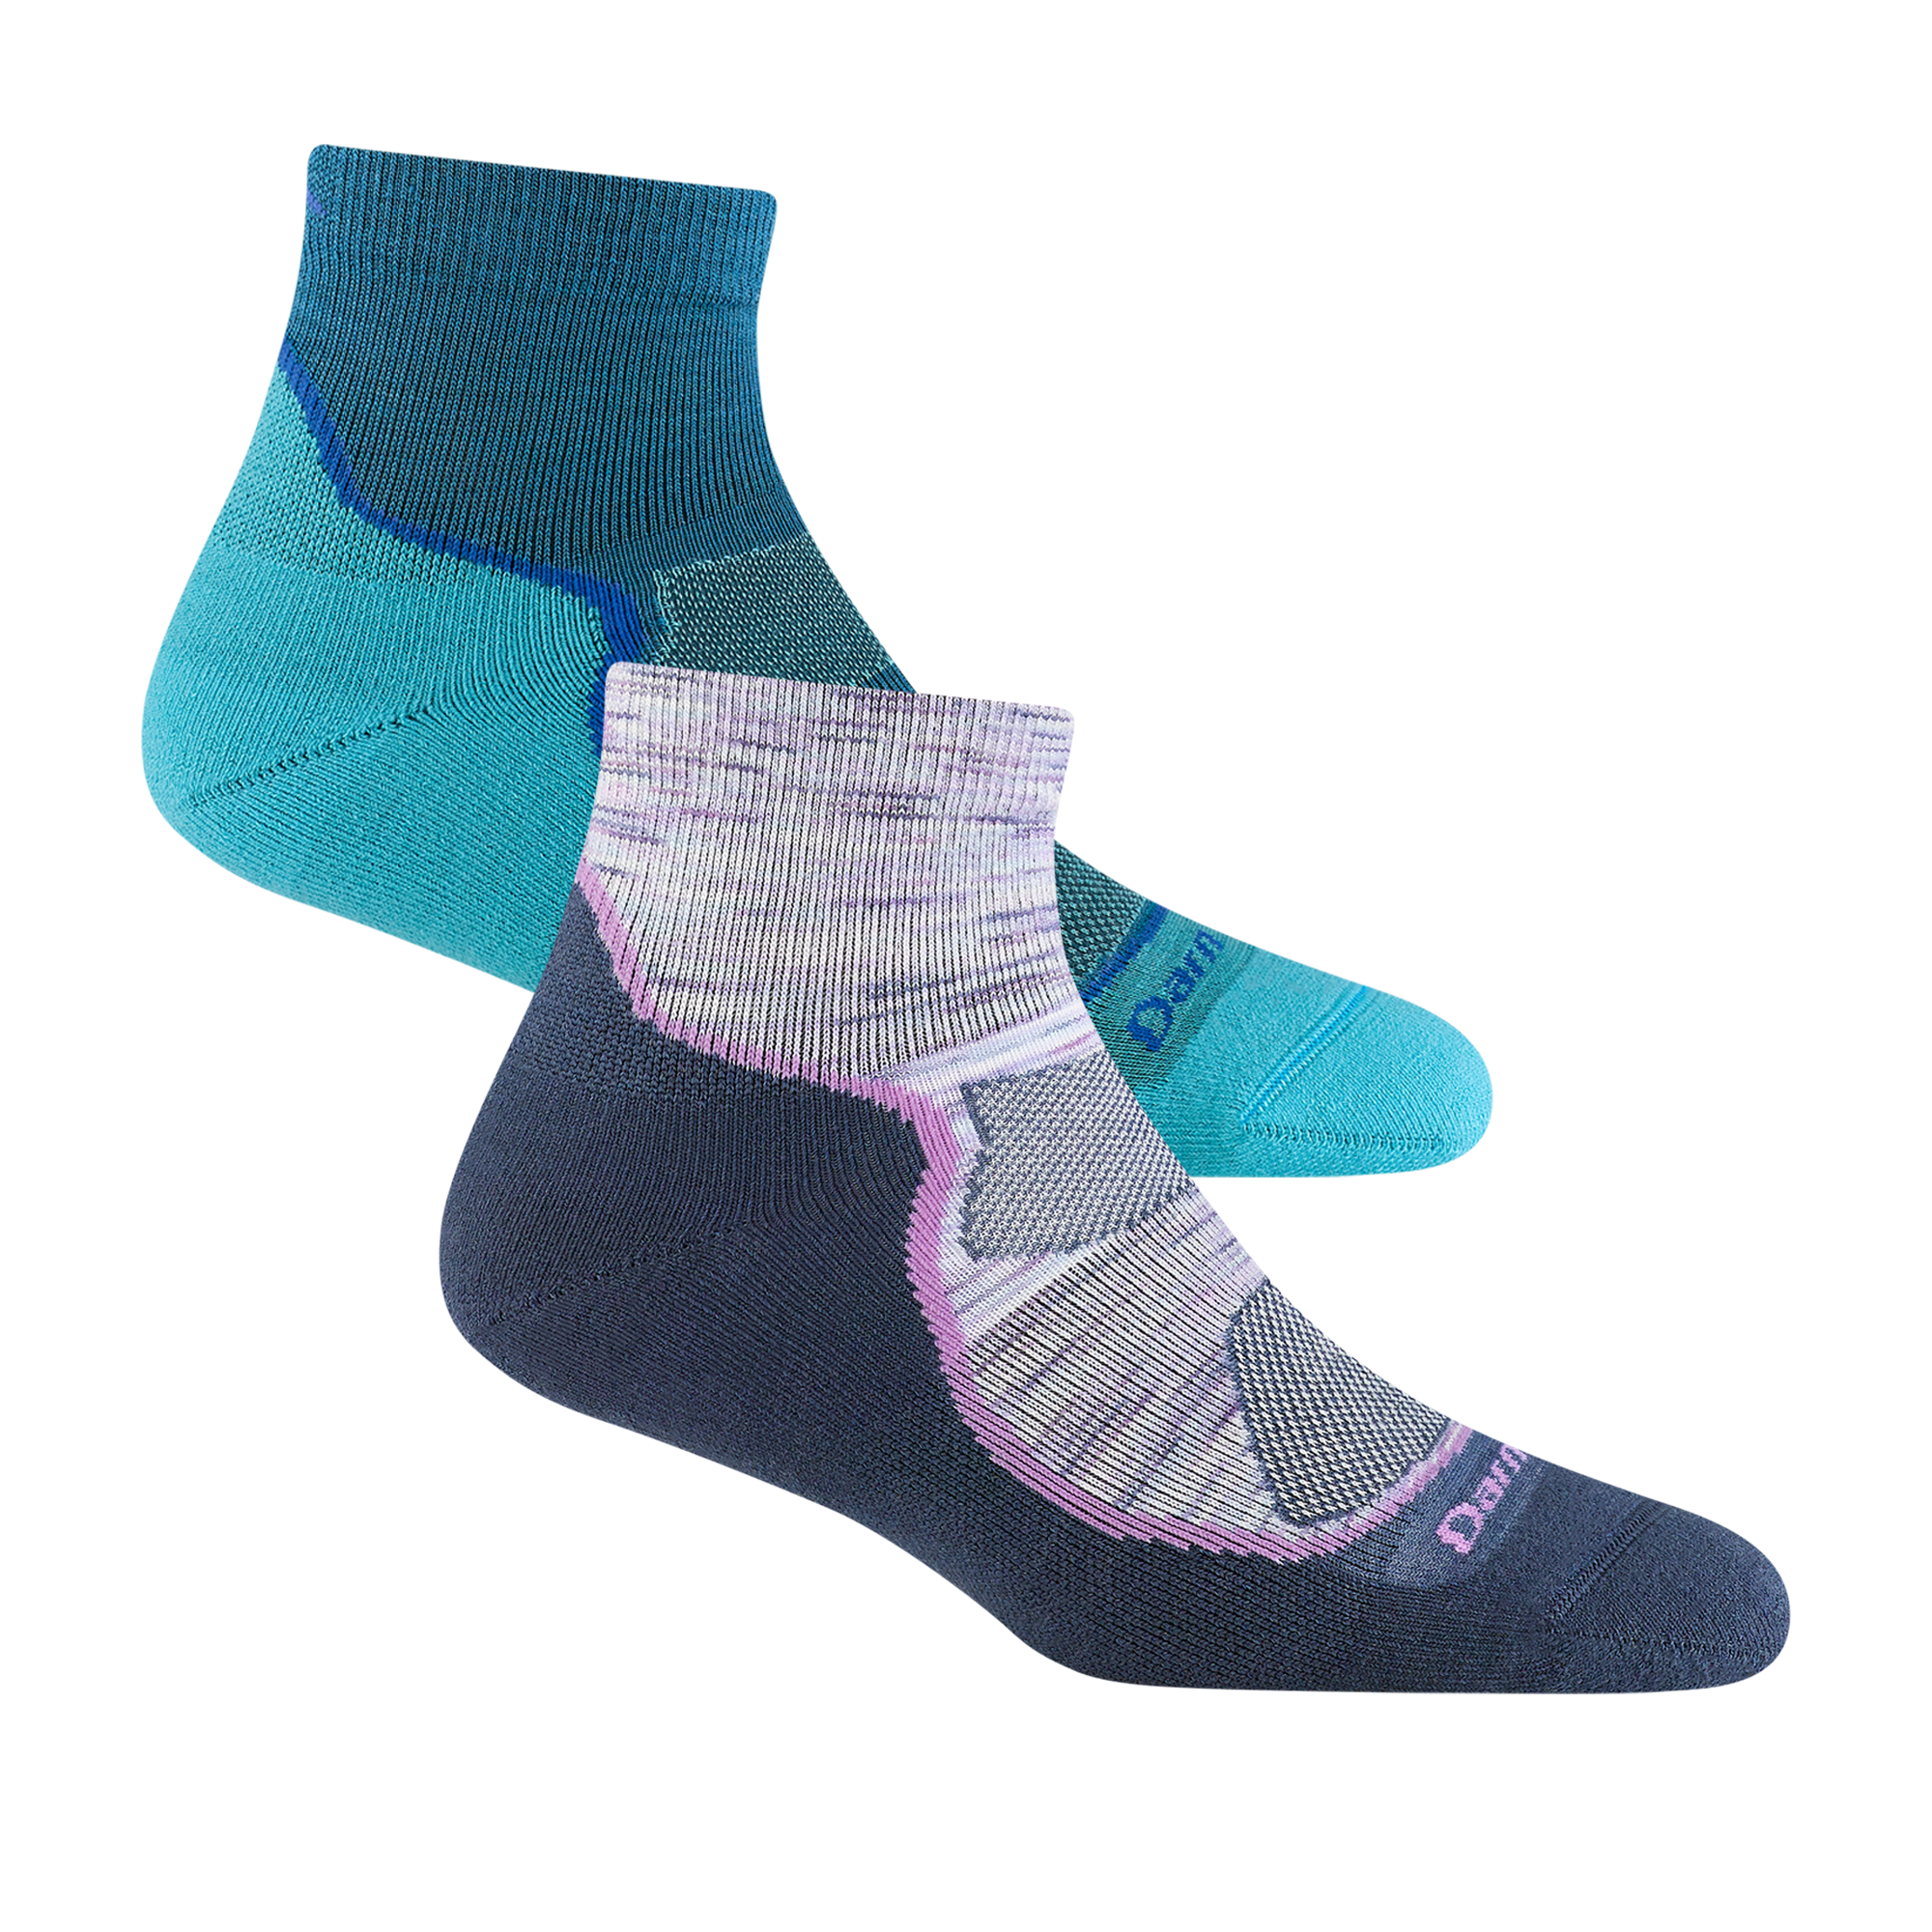 2 pack bundle including 2 pairs of the women's light hiker quarter hiking sock in cascade and cosmic purple